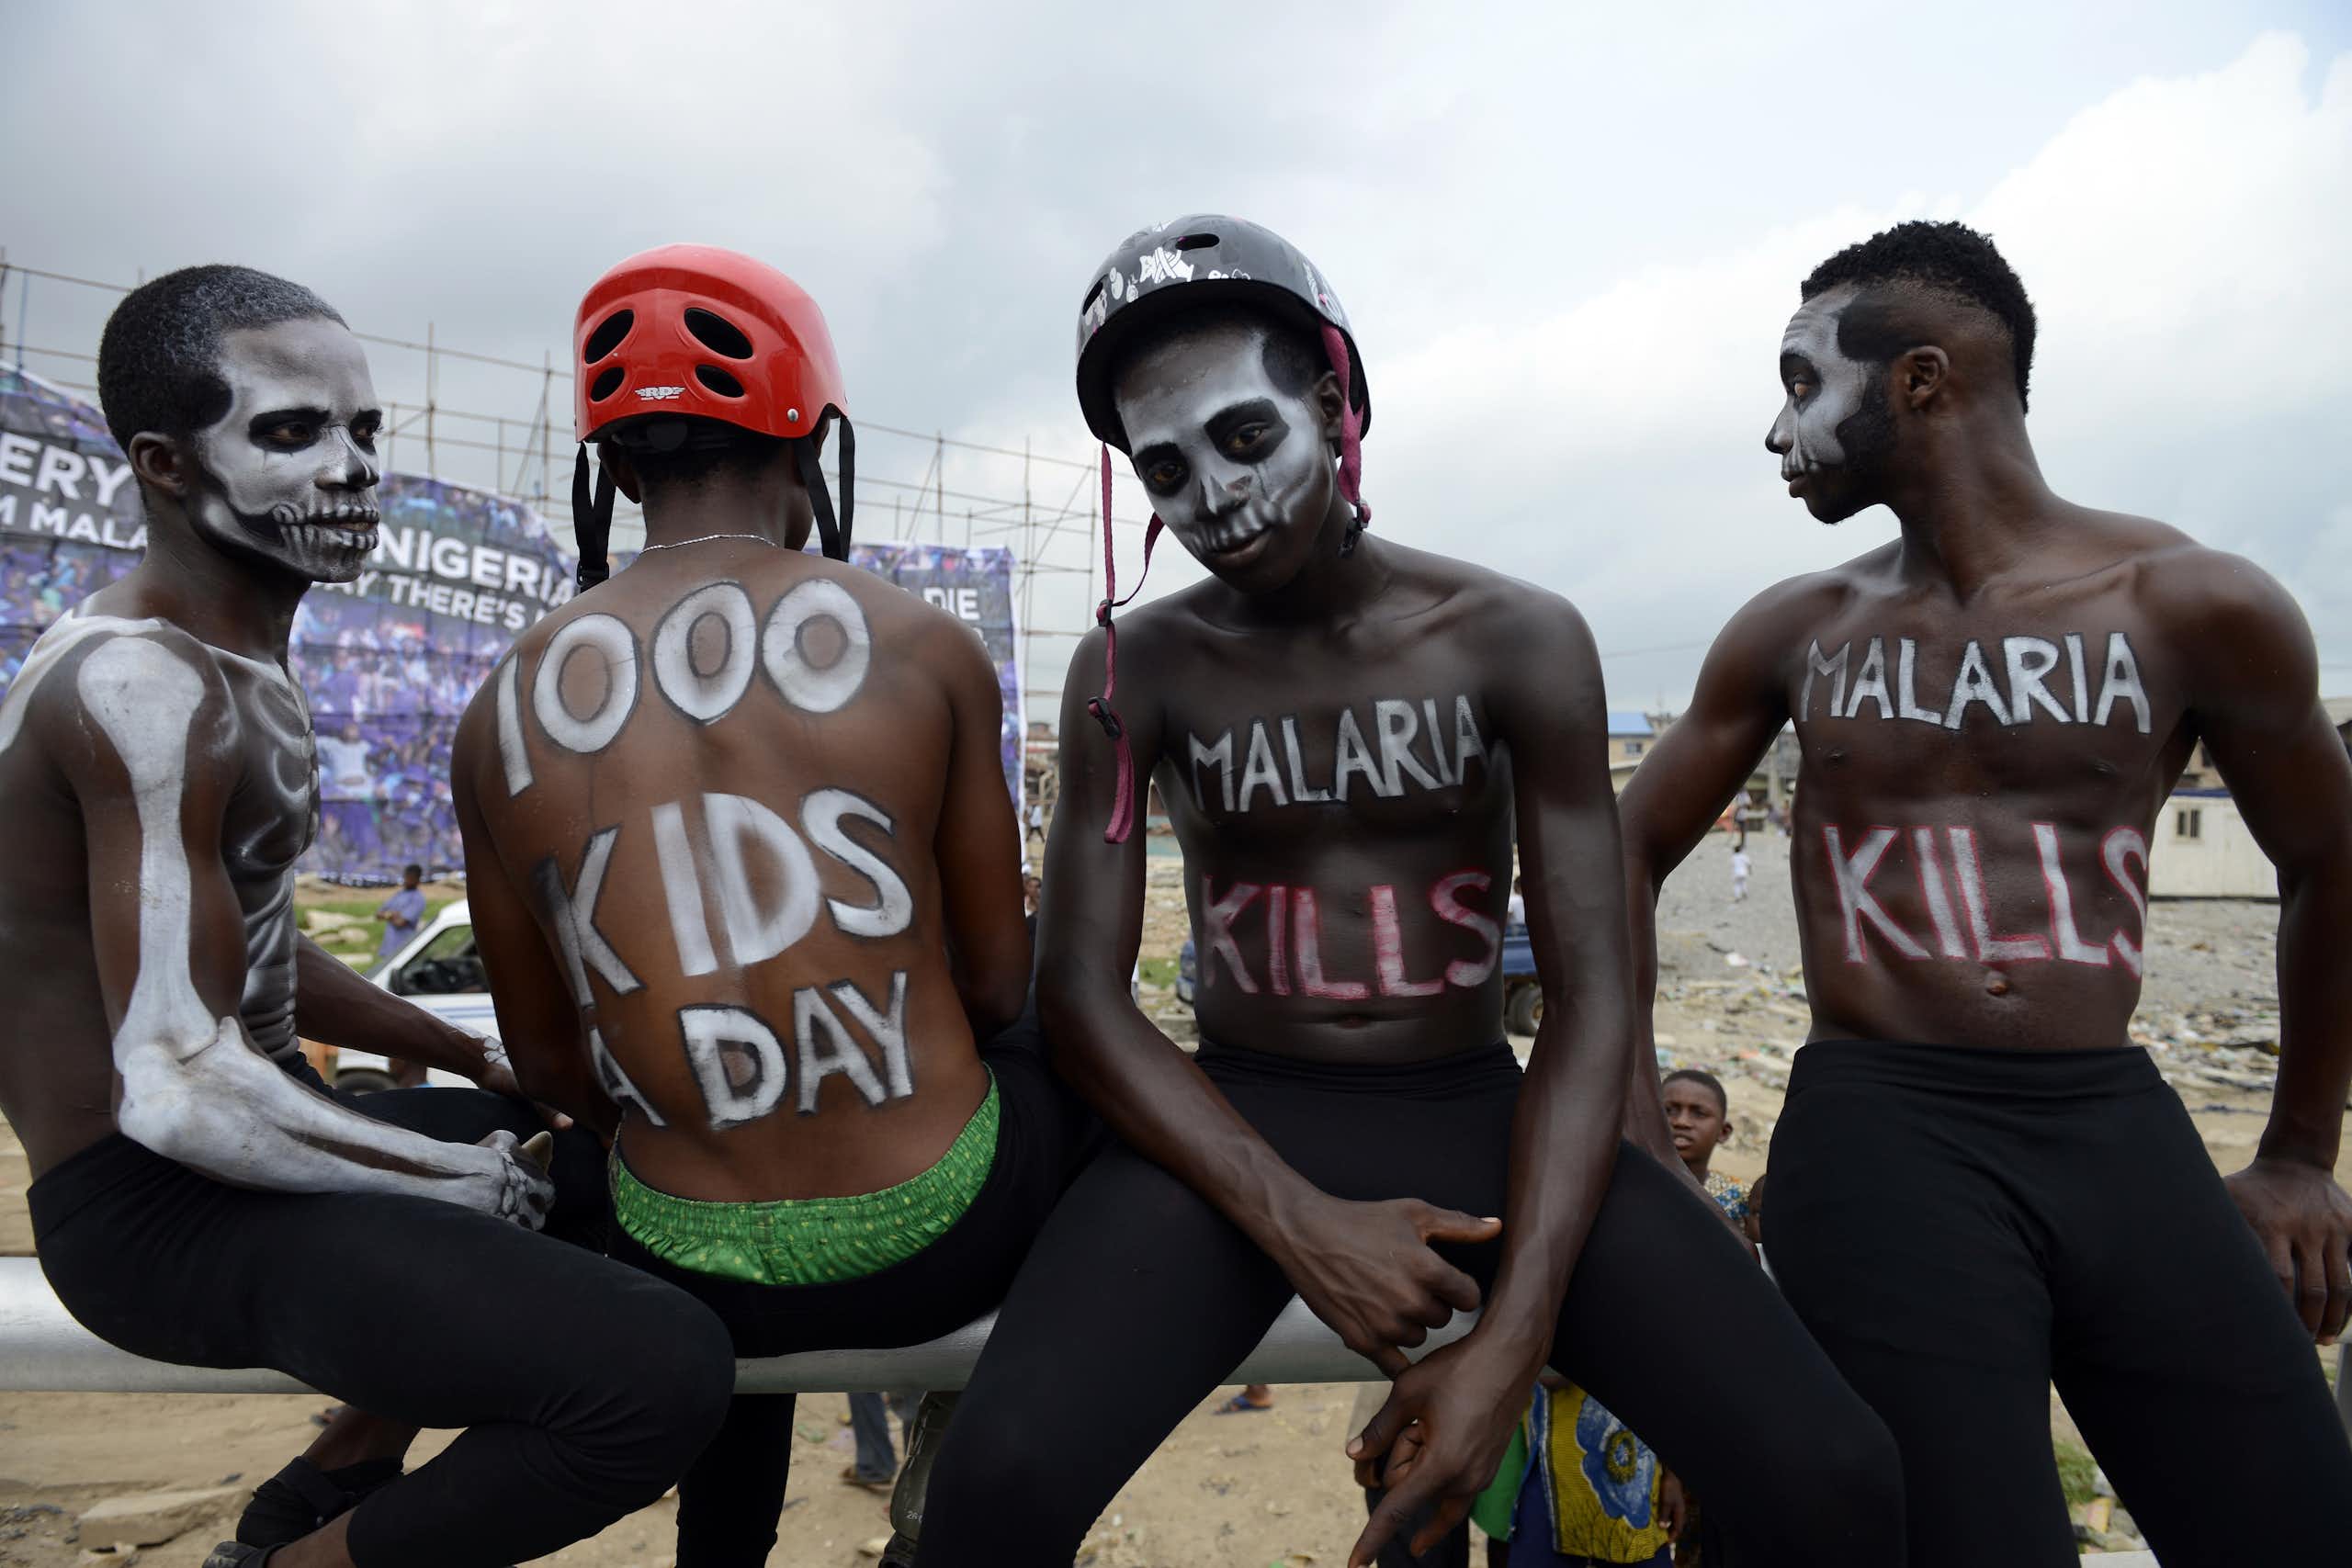 Actors paint their bodies with paint to draw attention to the deaths caused by malaria